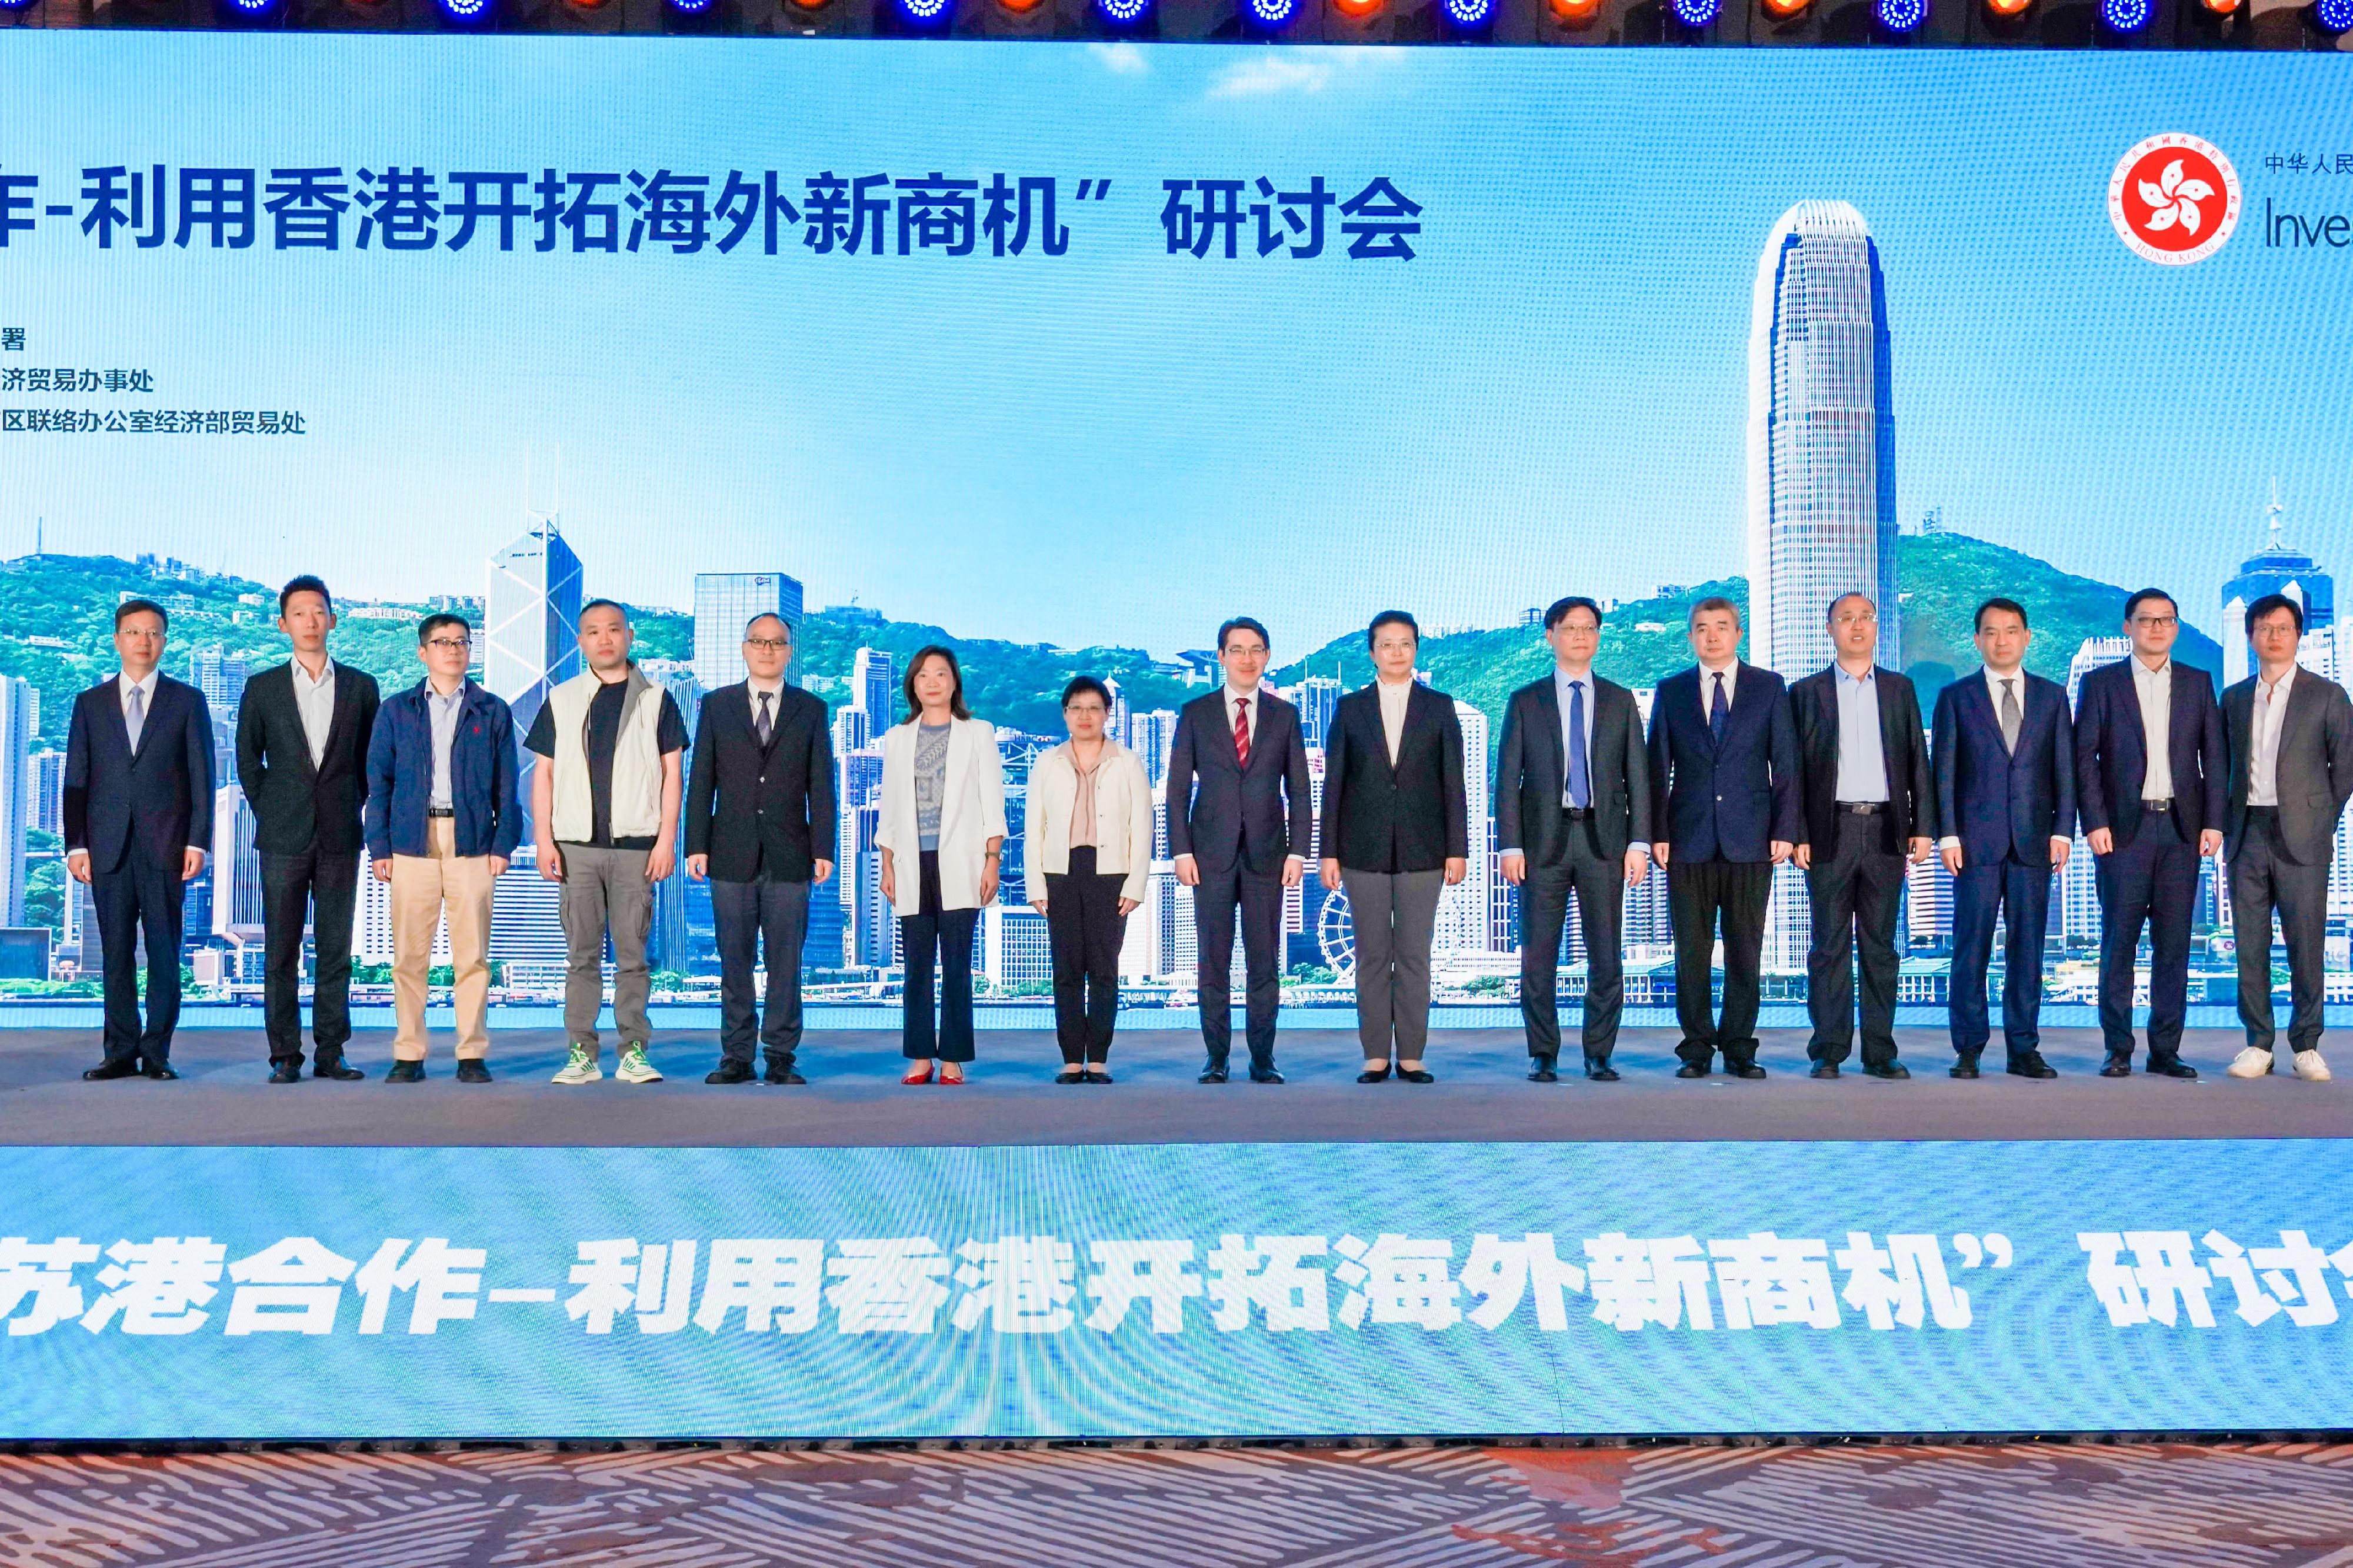 Invest Hong Kong (InvestHK) and Jiangsu Provincial Government co-hosted a seminar in Nantong, Jiangsu Province today (November 7), encouraging Jiangsu enterprises to make use of Hong Kong's business advantages and opportunities amid the Belt and Road Initiative and the Guangdong-Hong Kong-Macao Greater Bay Area development to accelerate their overseas expansion. Photo shows the Acting Director-General of Investment Promotion at InvestHK, Dr Jimmy Chiang (centre); the Acting Head of the Commercial Office of the Economic Affairs Department of the Liaison Office of the Central People's Government in the Hong Kong Special Administrative Region, Ms Chen Jiarong (seventh left), Vice Mayor of the People's Government of Nantong Municipality Ms Li Ling (seventh right) and guests at the seminar.


